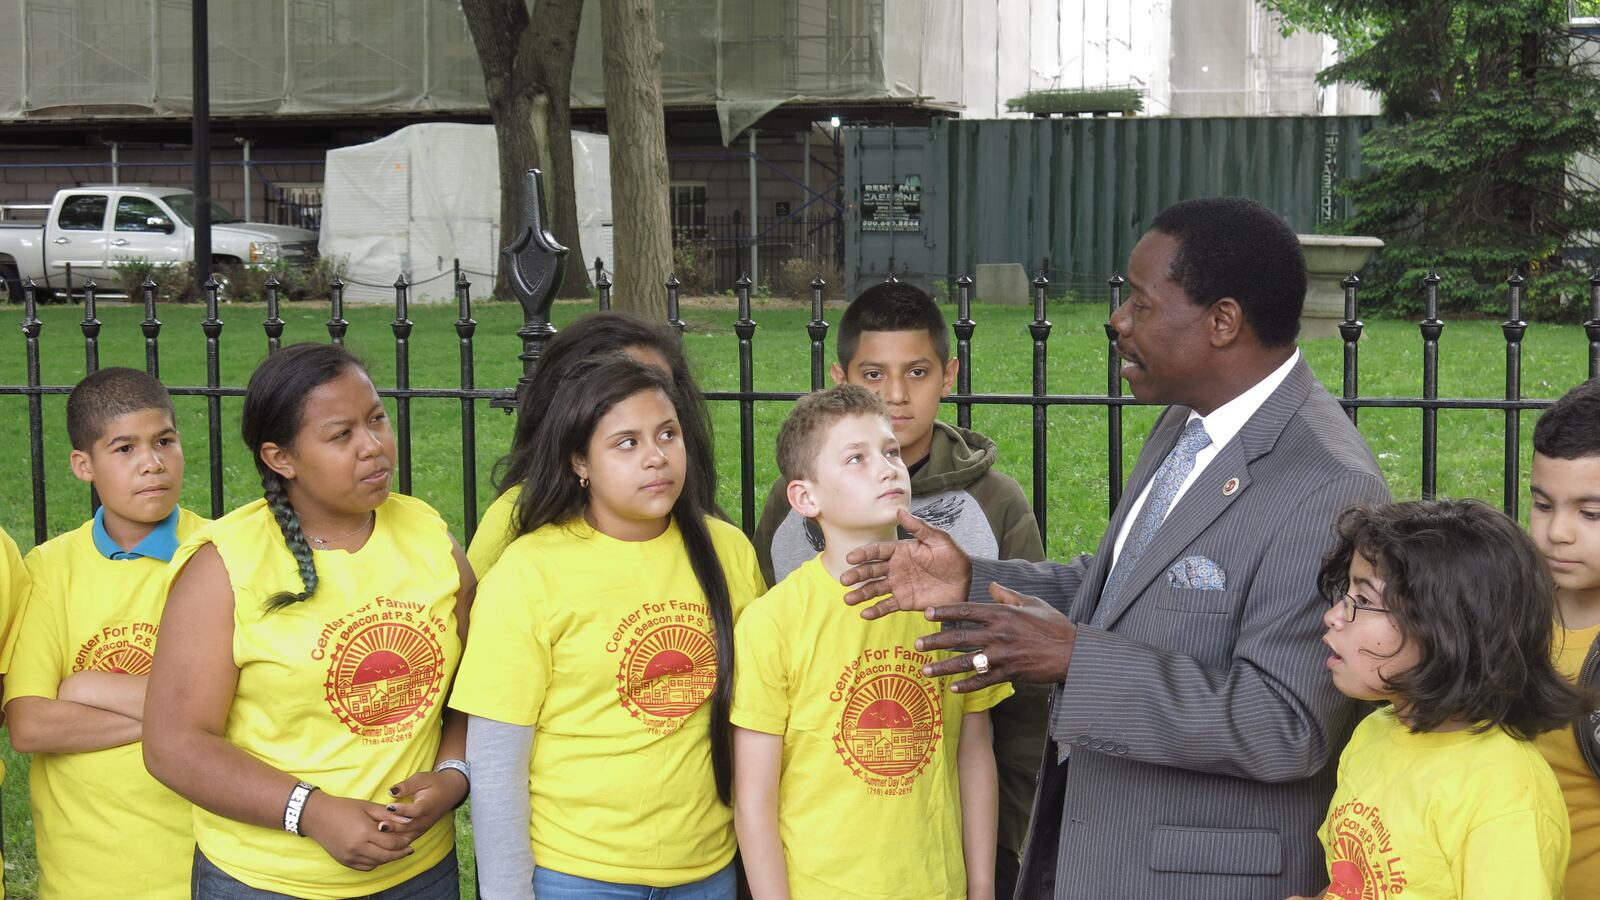 City Councilman Mathieu Eugene joined advocates and students in after-school programs on Wednesday at City Hall.